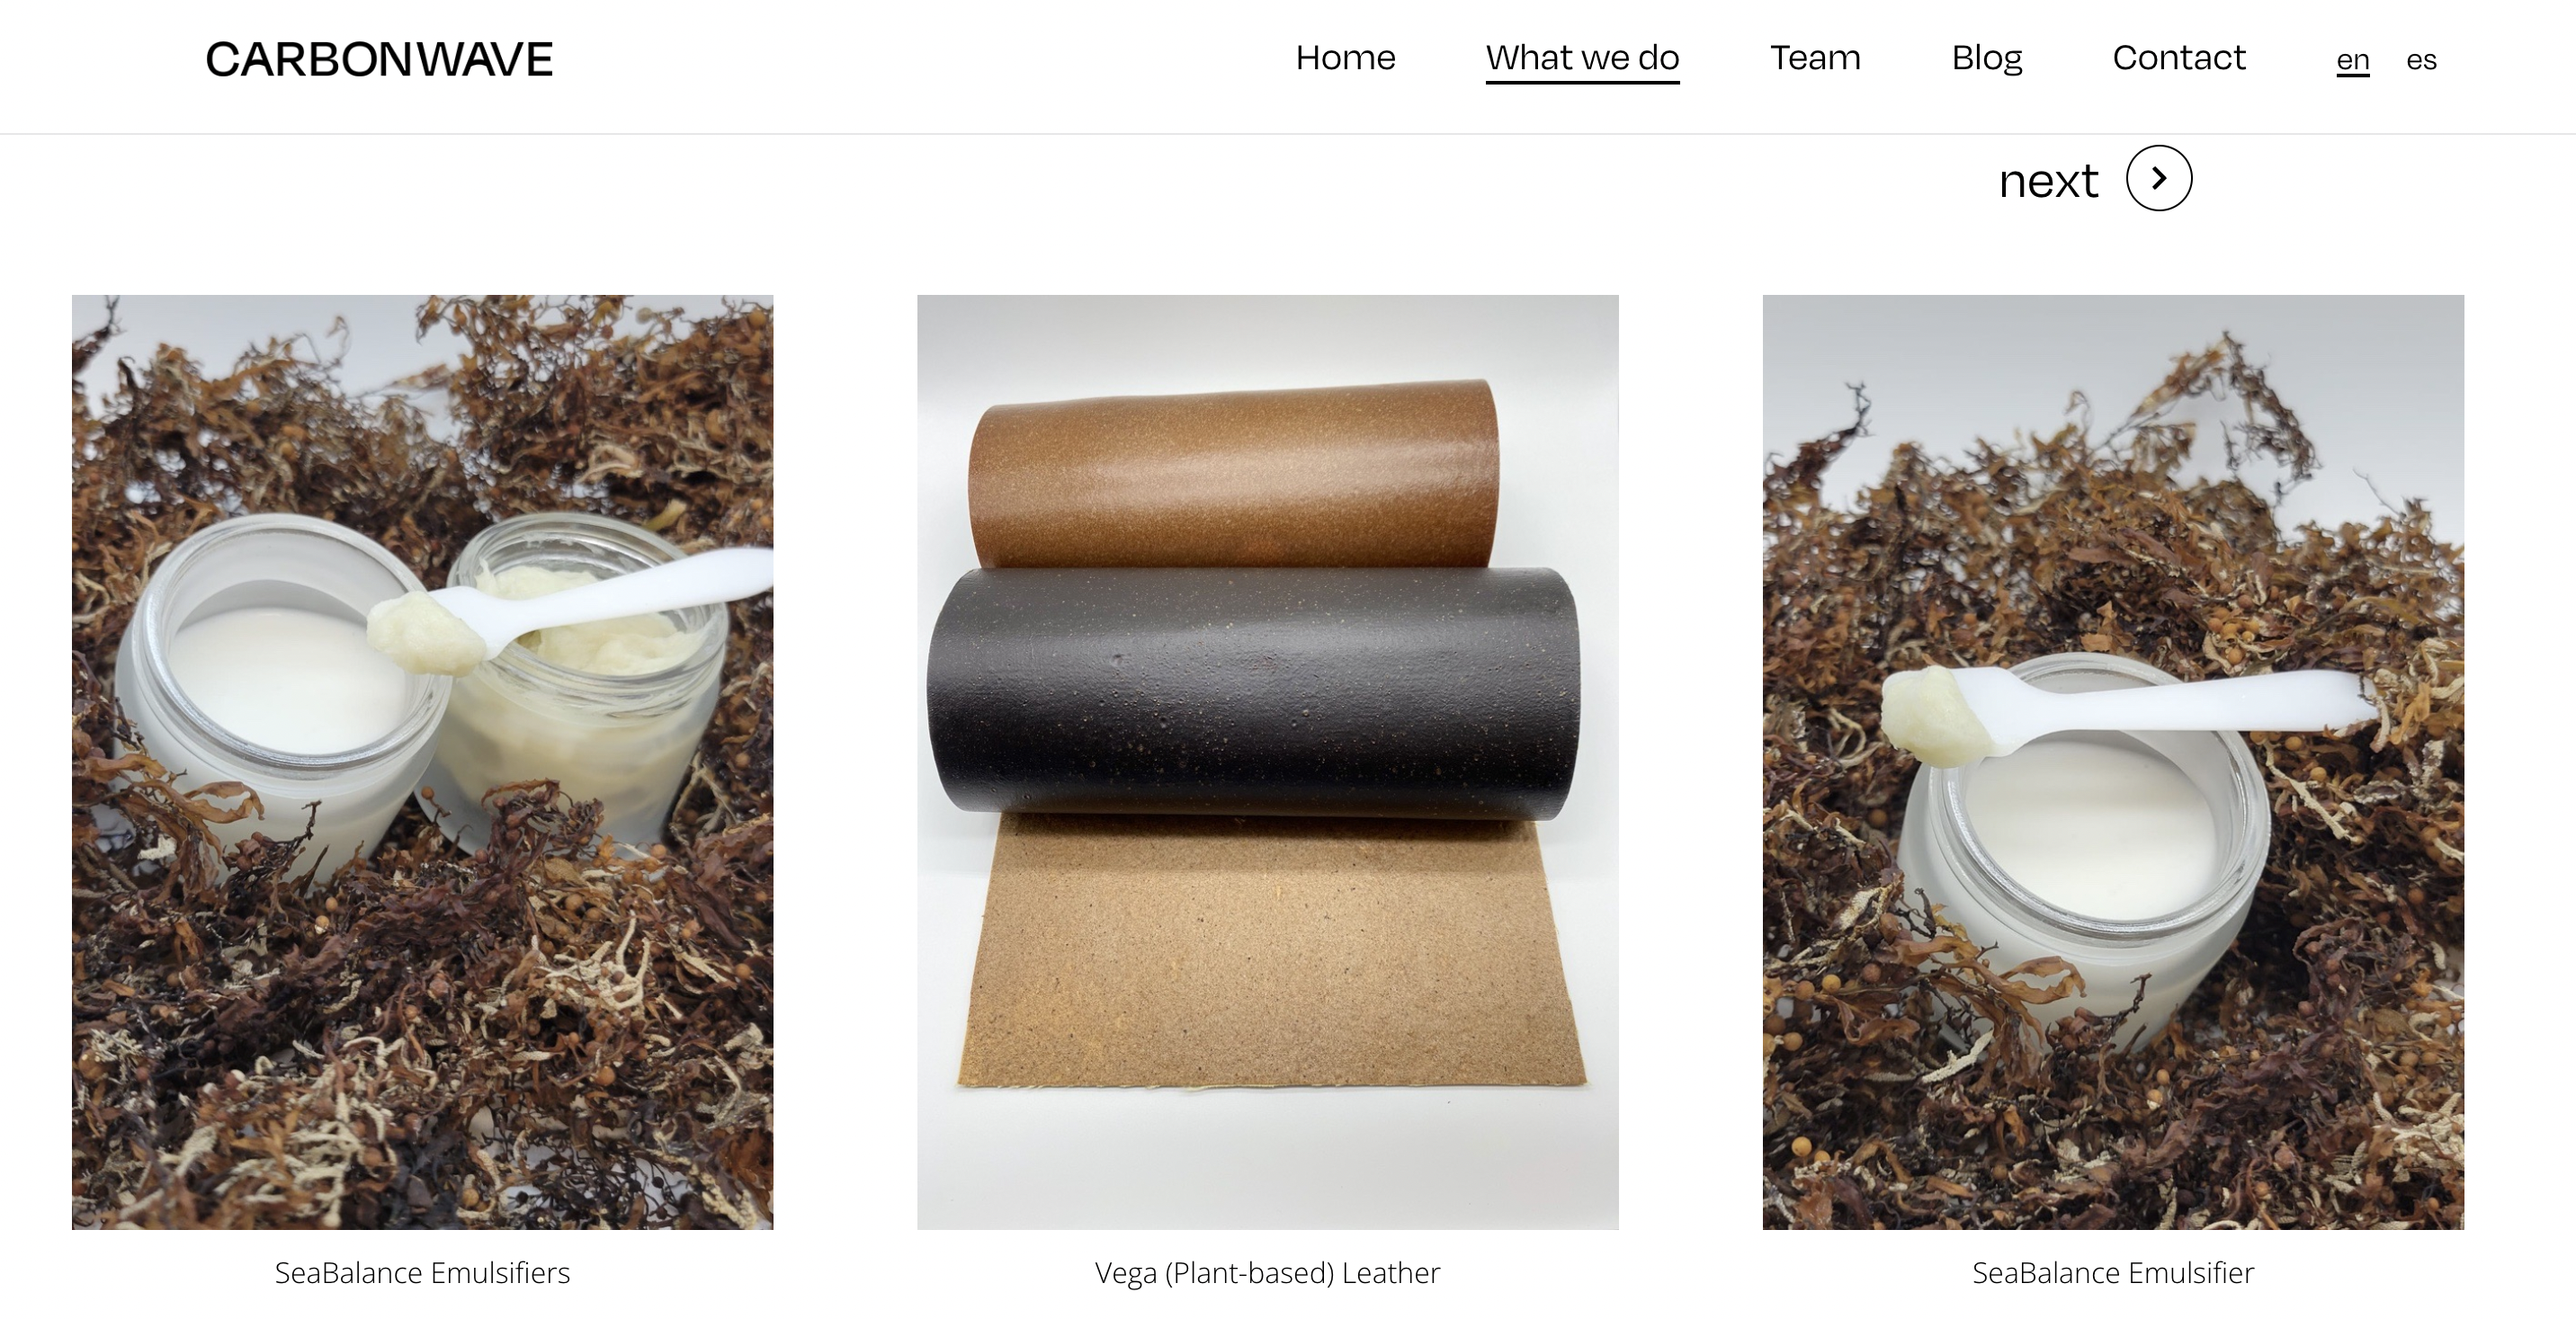 Seaweed Biomaterial Startup Carbonwave Completes $5 Million Series A Financing